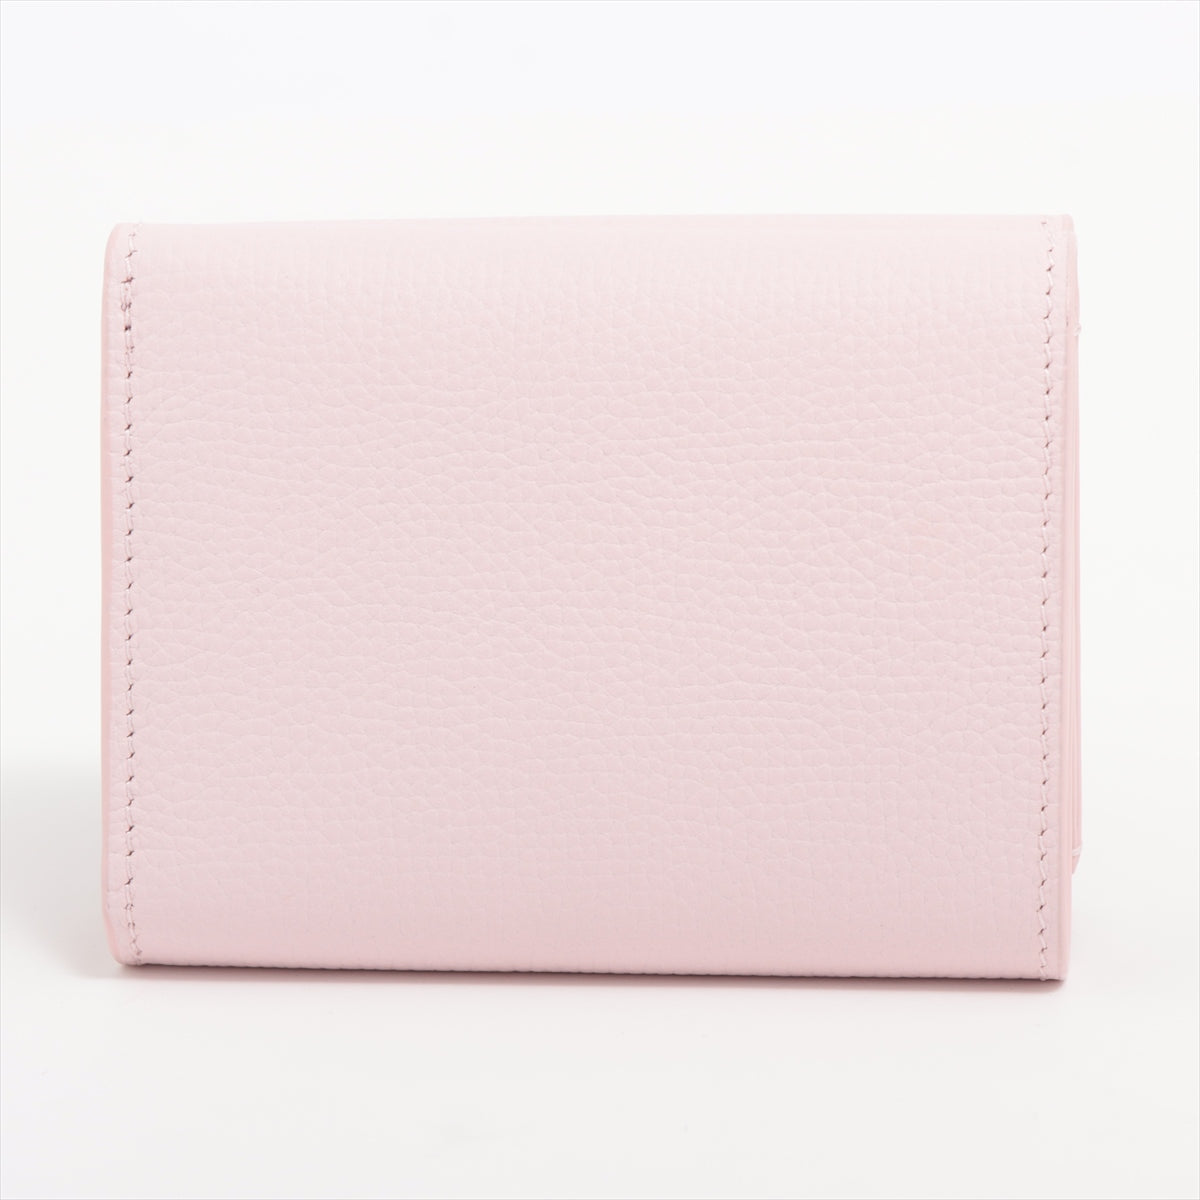 Loewe Anagram Tri Fold Leather Compact Wallet Pink